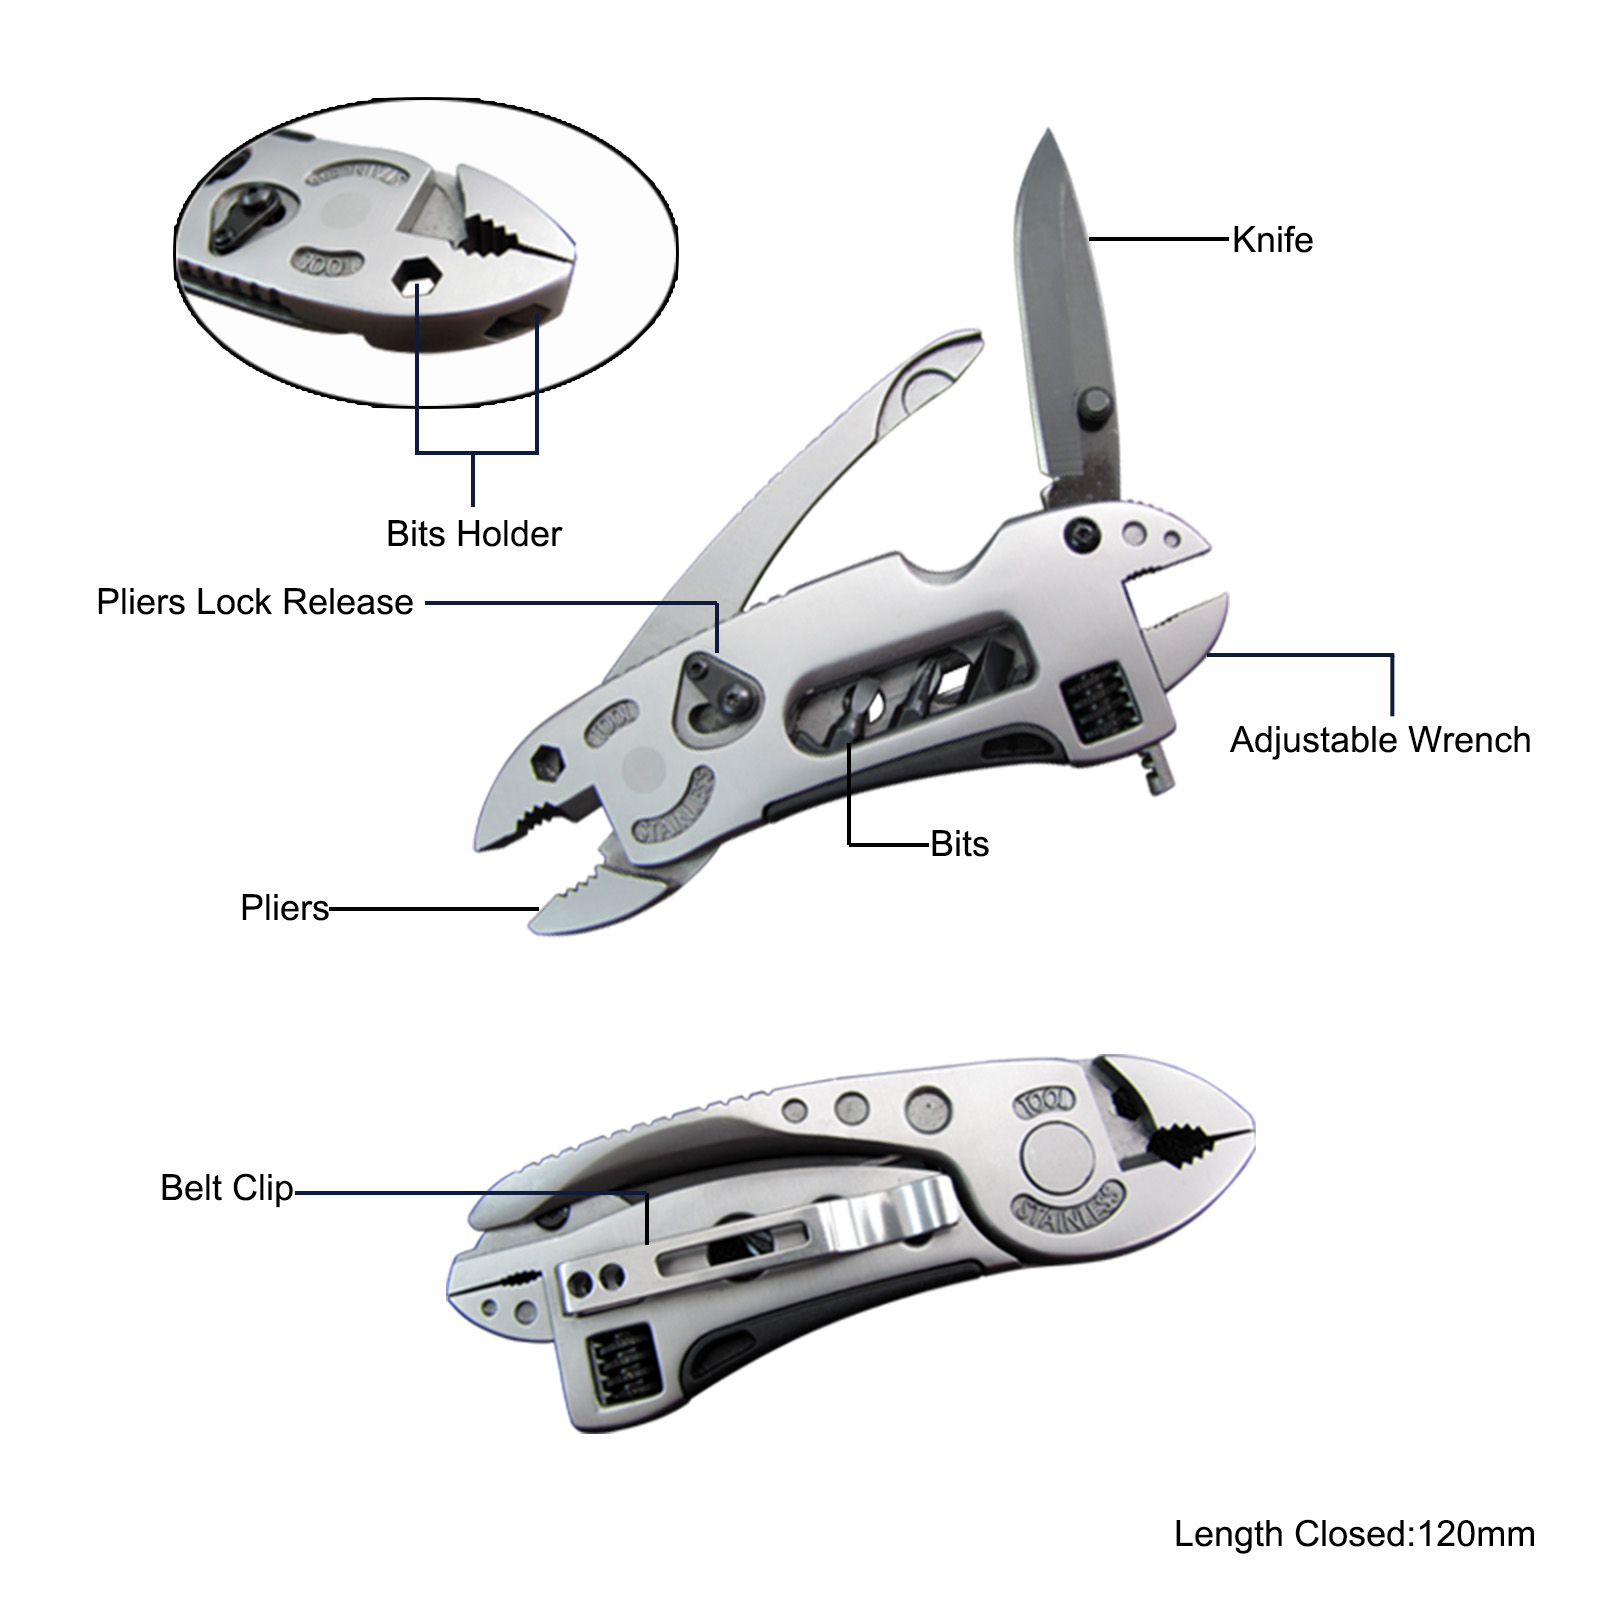 #8180 Multi Function Tool with Compact Design